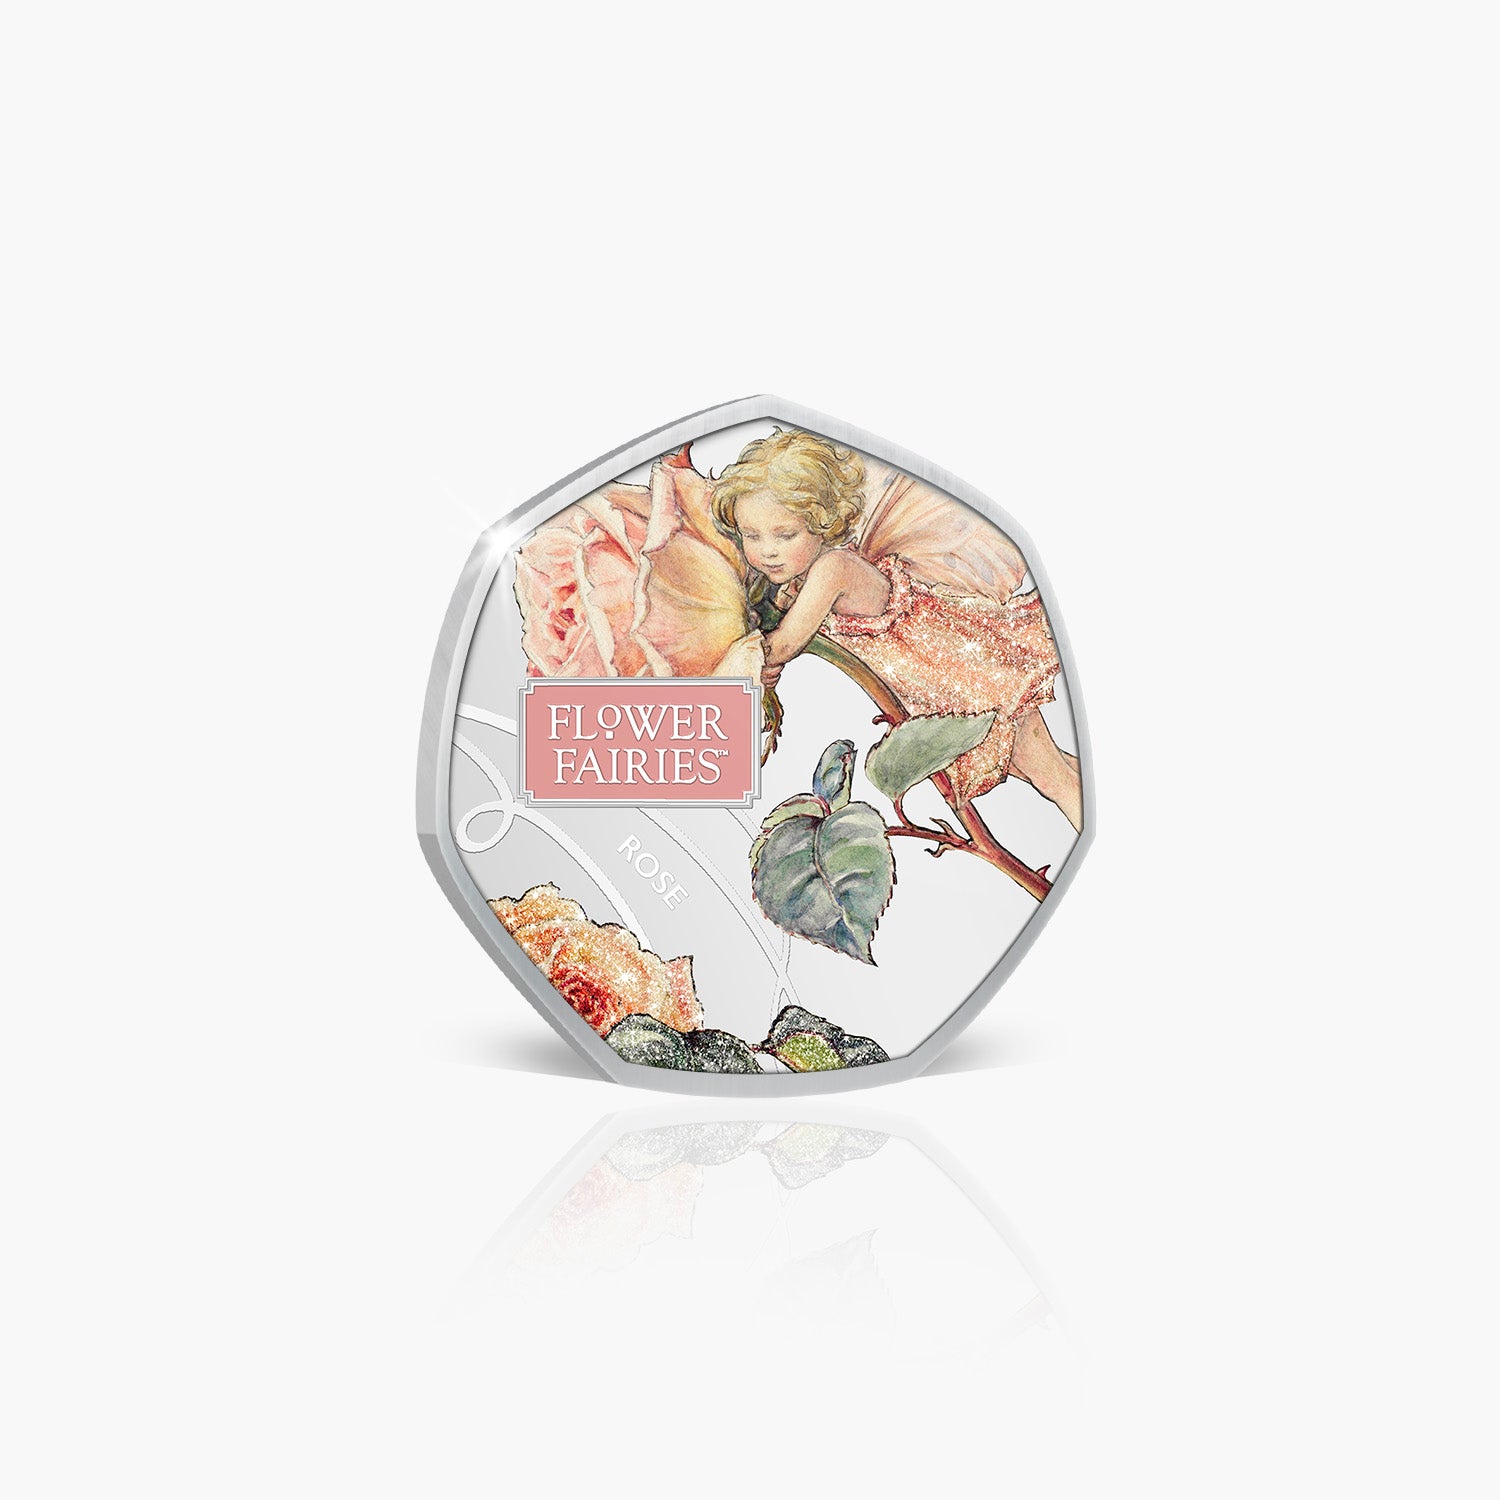 Rose Silver Plated Coin